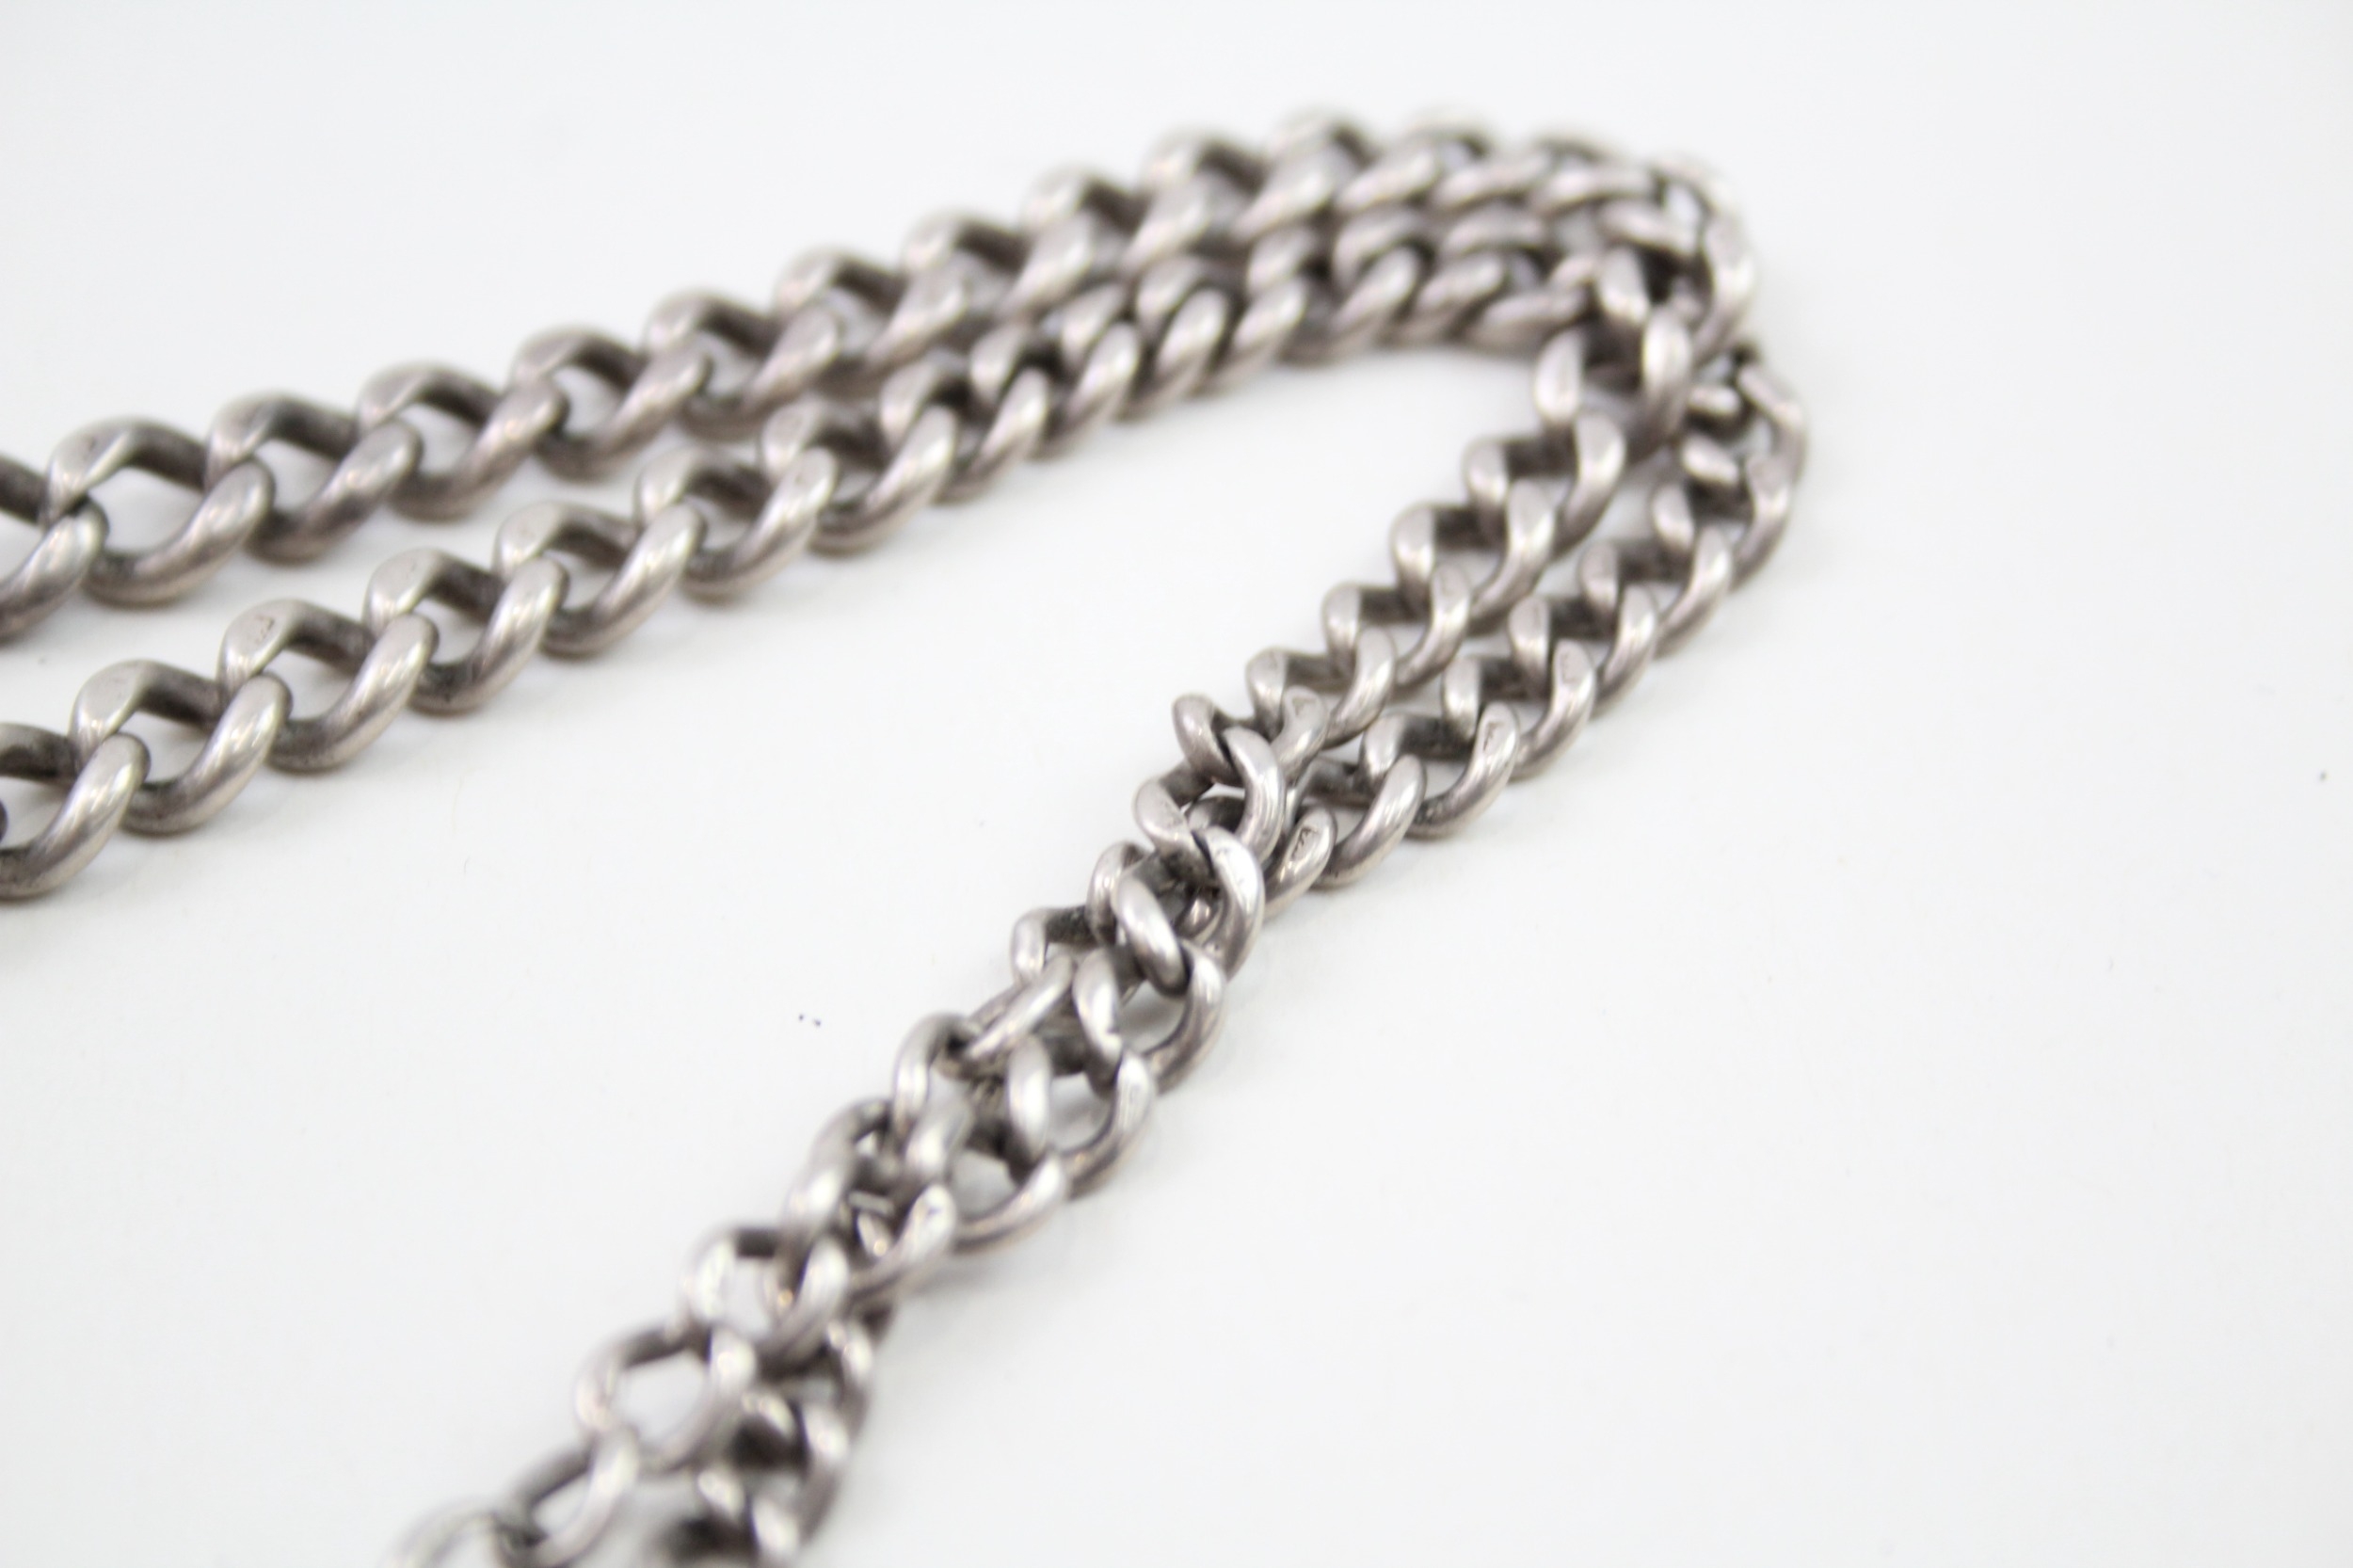 Silver antique watch chain with coin fob (40g) - Image 6 of 6